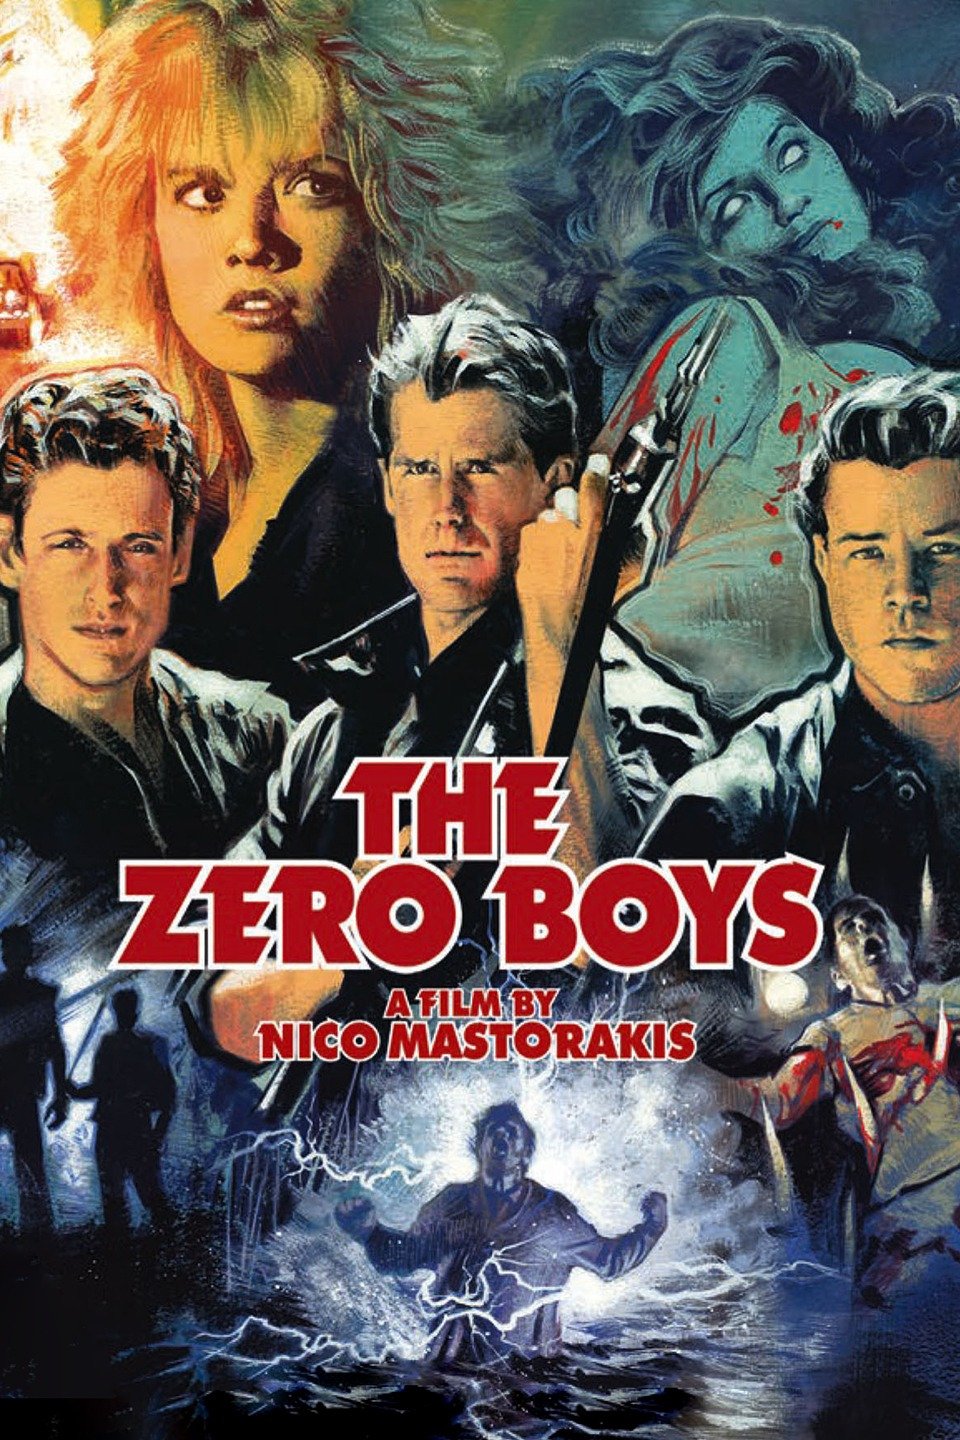 Zero boys, or a different take on Friday the 13th